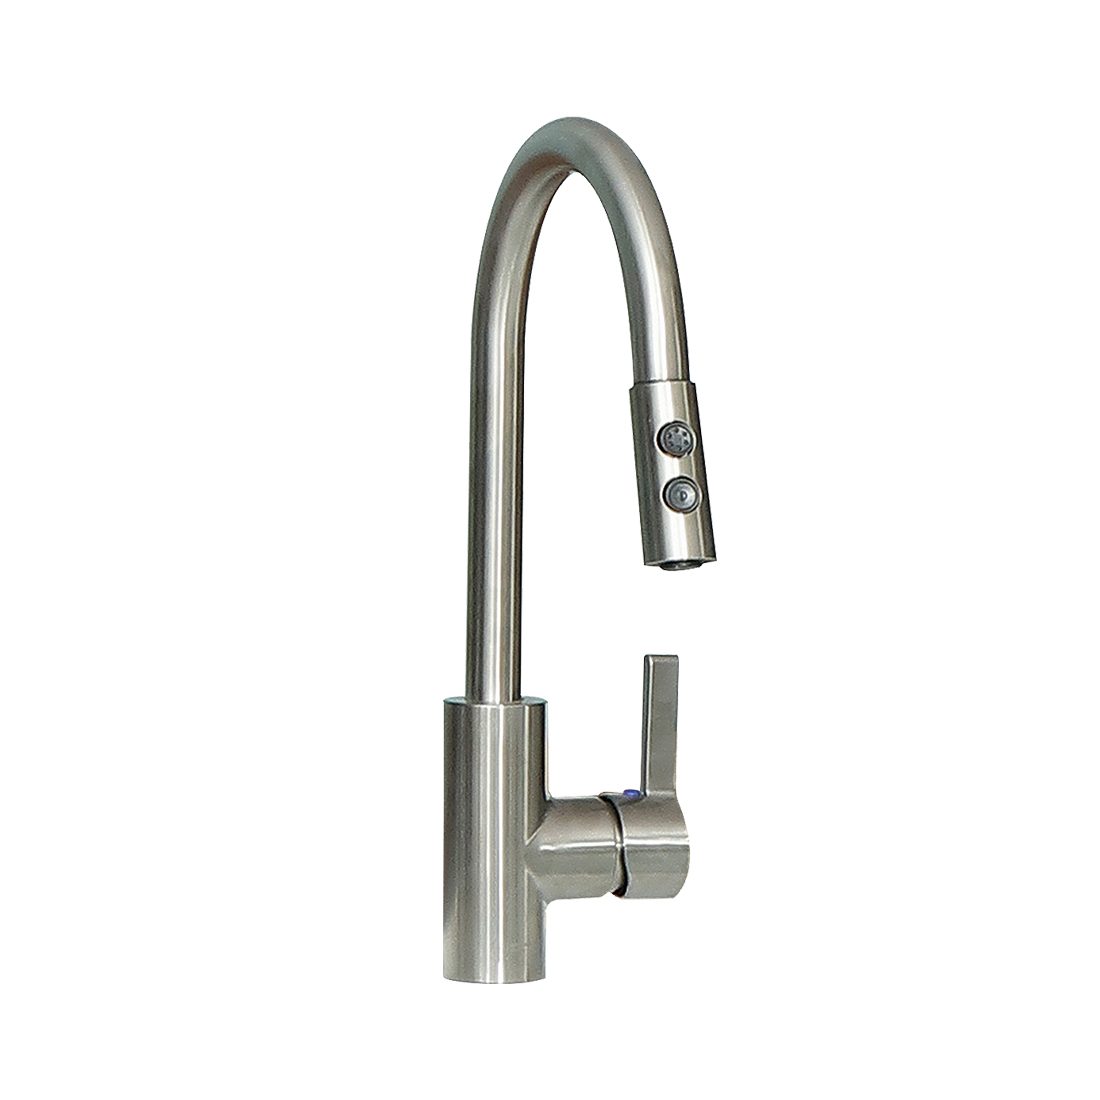 Hagen 24.4inch Laundry Cabinet Pull Down Brushed Nickel Faucet View